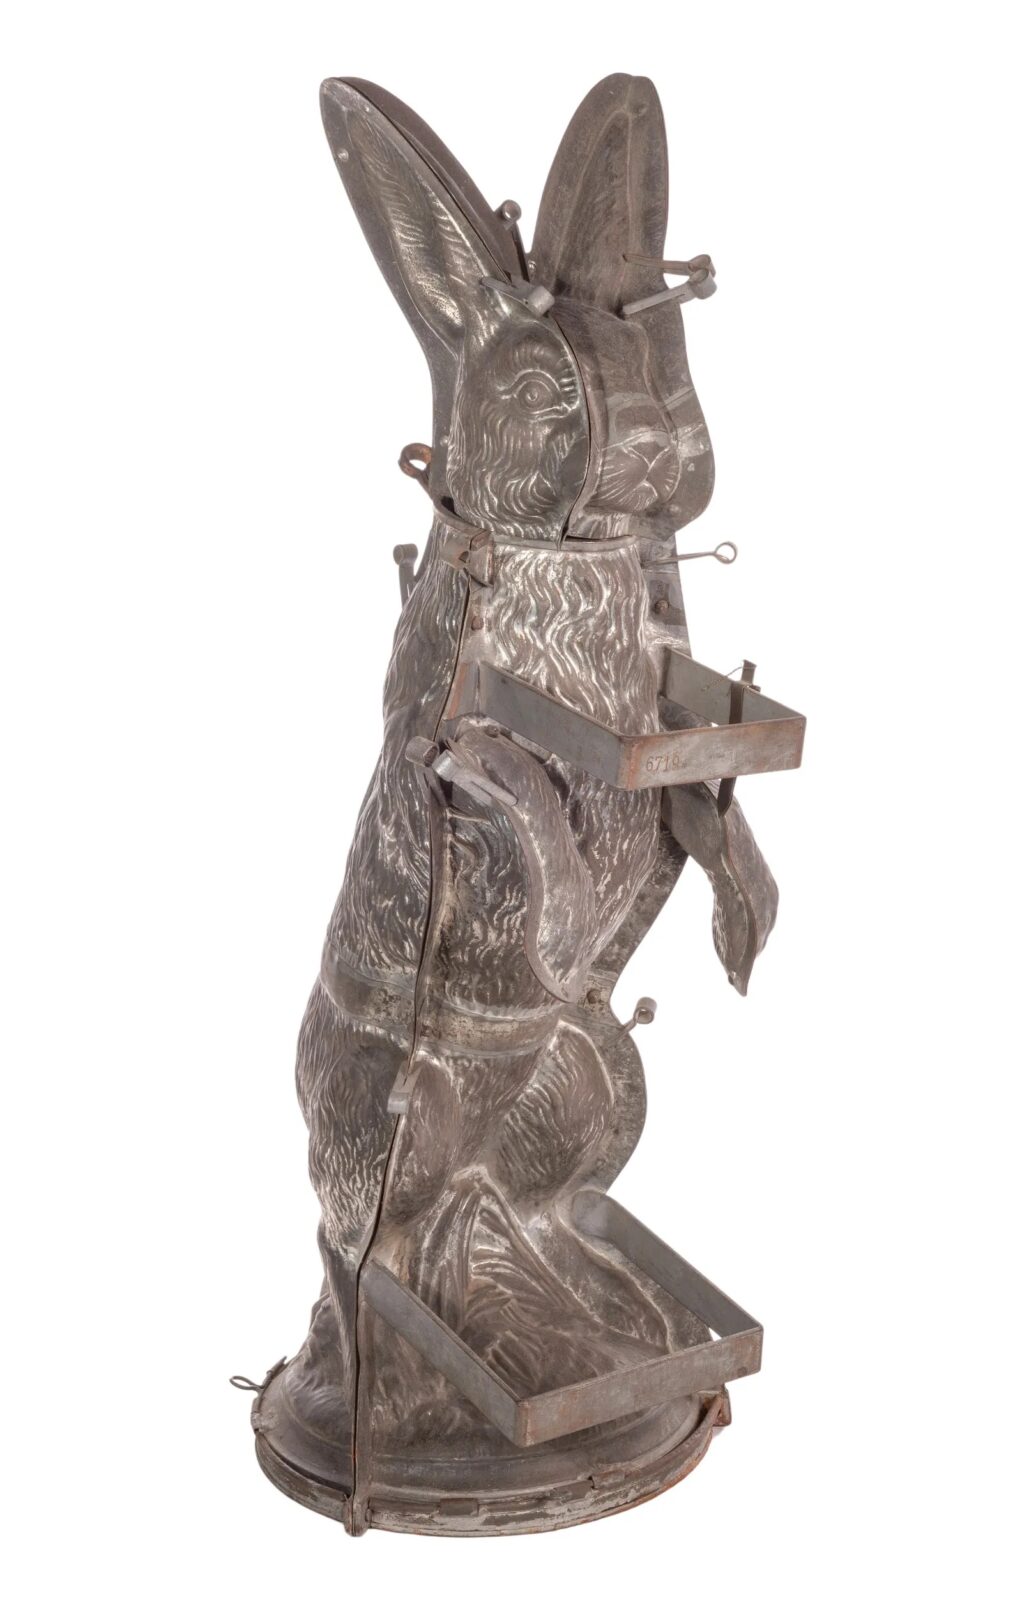 Anton Reiche showpiece chocolate mold in the form of a bunny, which sold for $11,000 ($13,750 with buyer's premium) at Leonard.